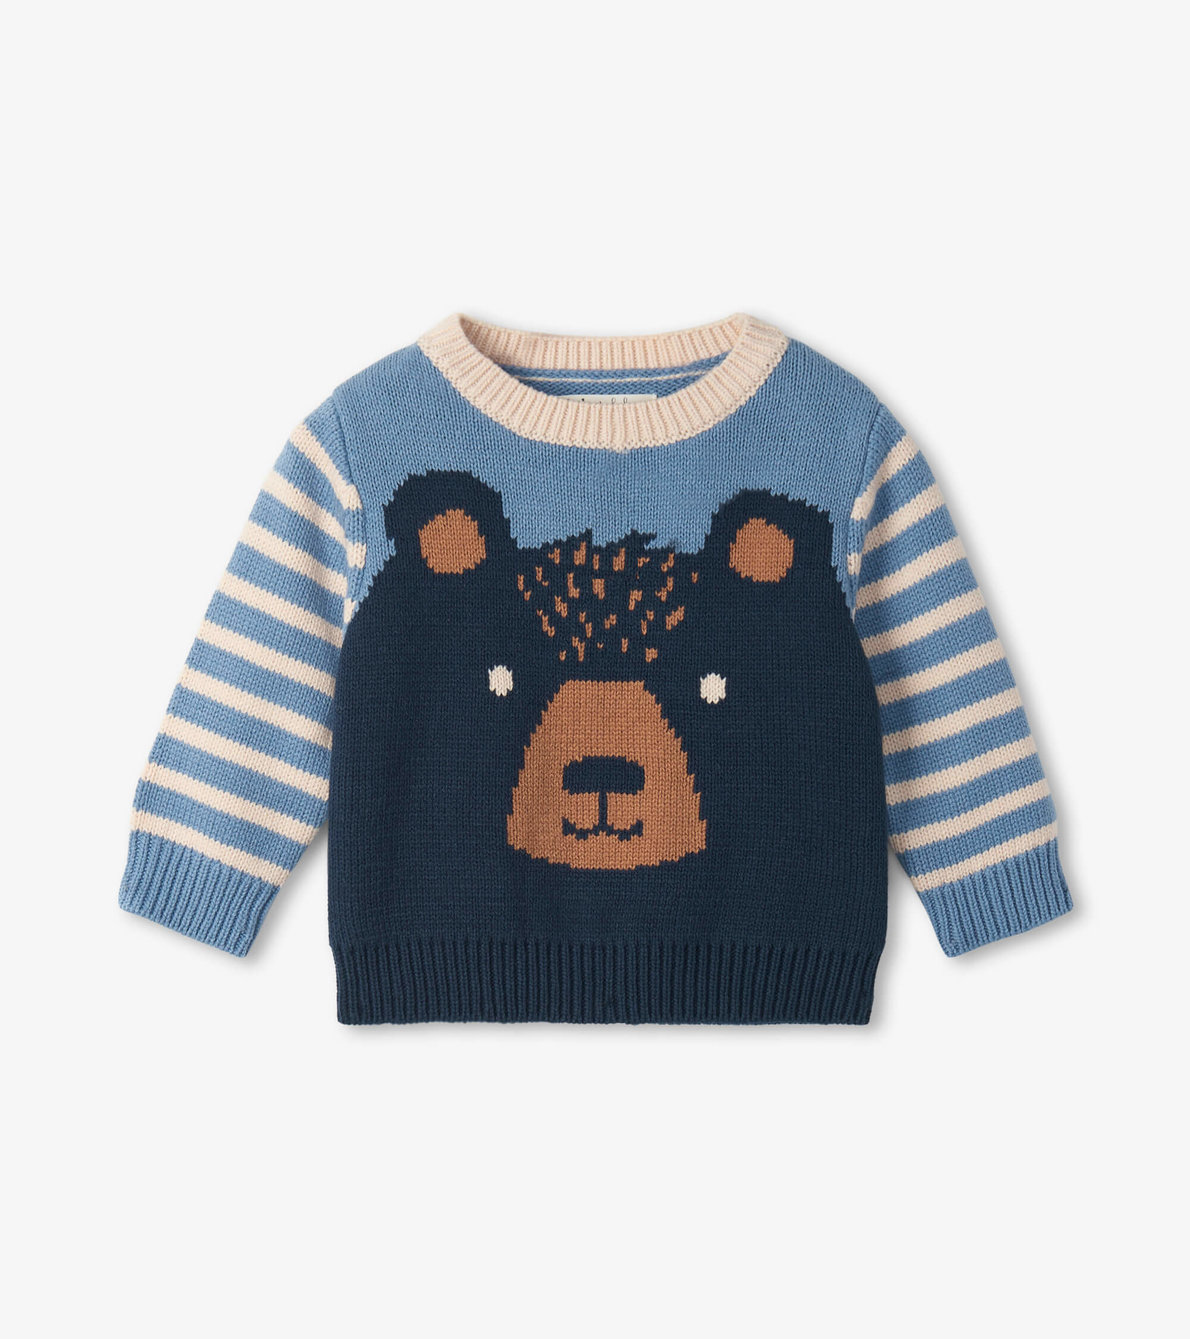 View larger image of Cheerful Bear Baby Sweater